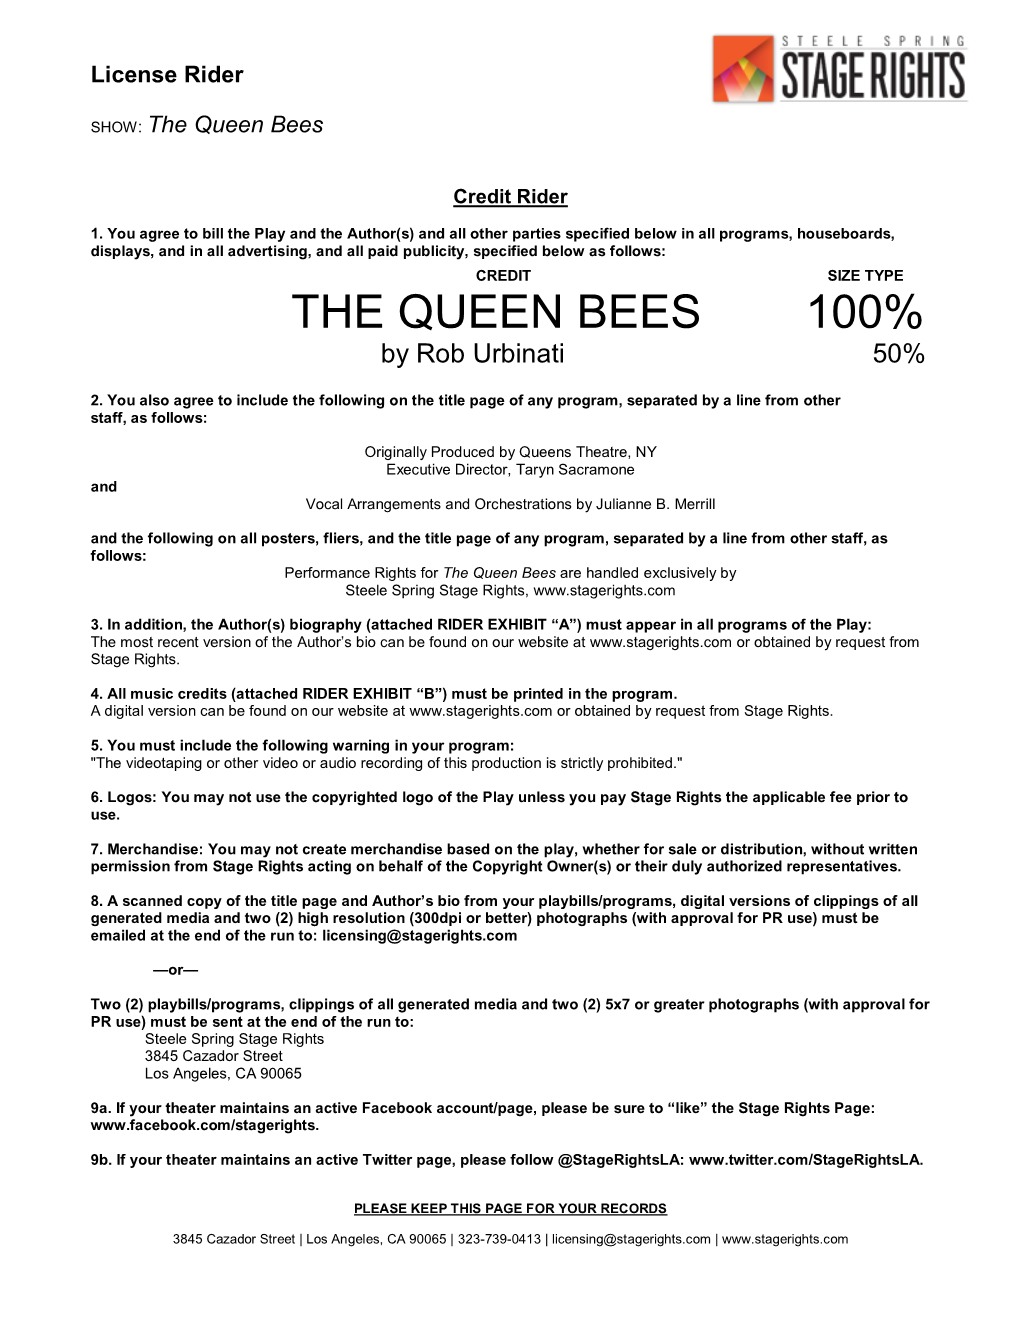 THE QUEEN BEES 100% by Rob Urbinati 50%